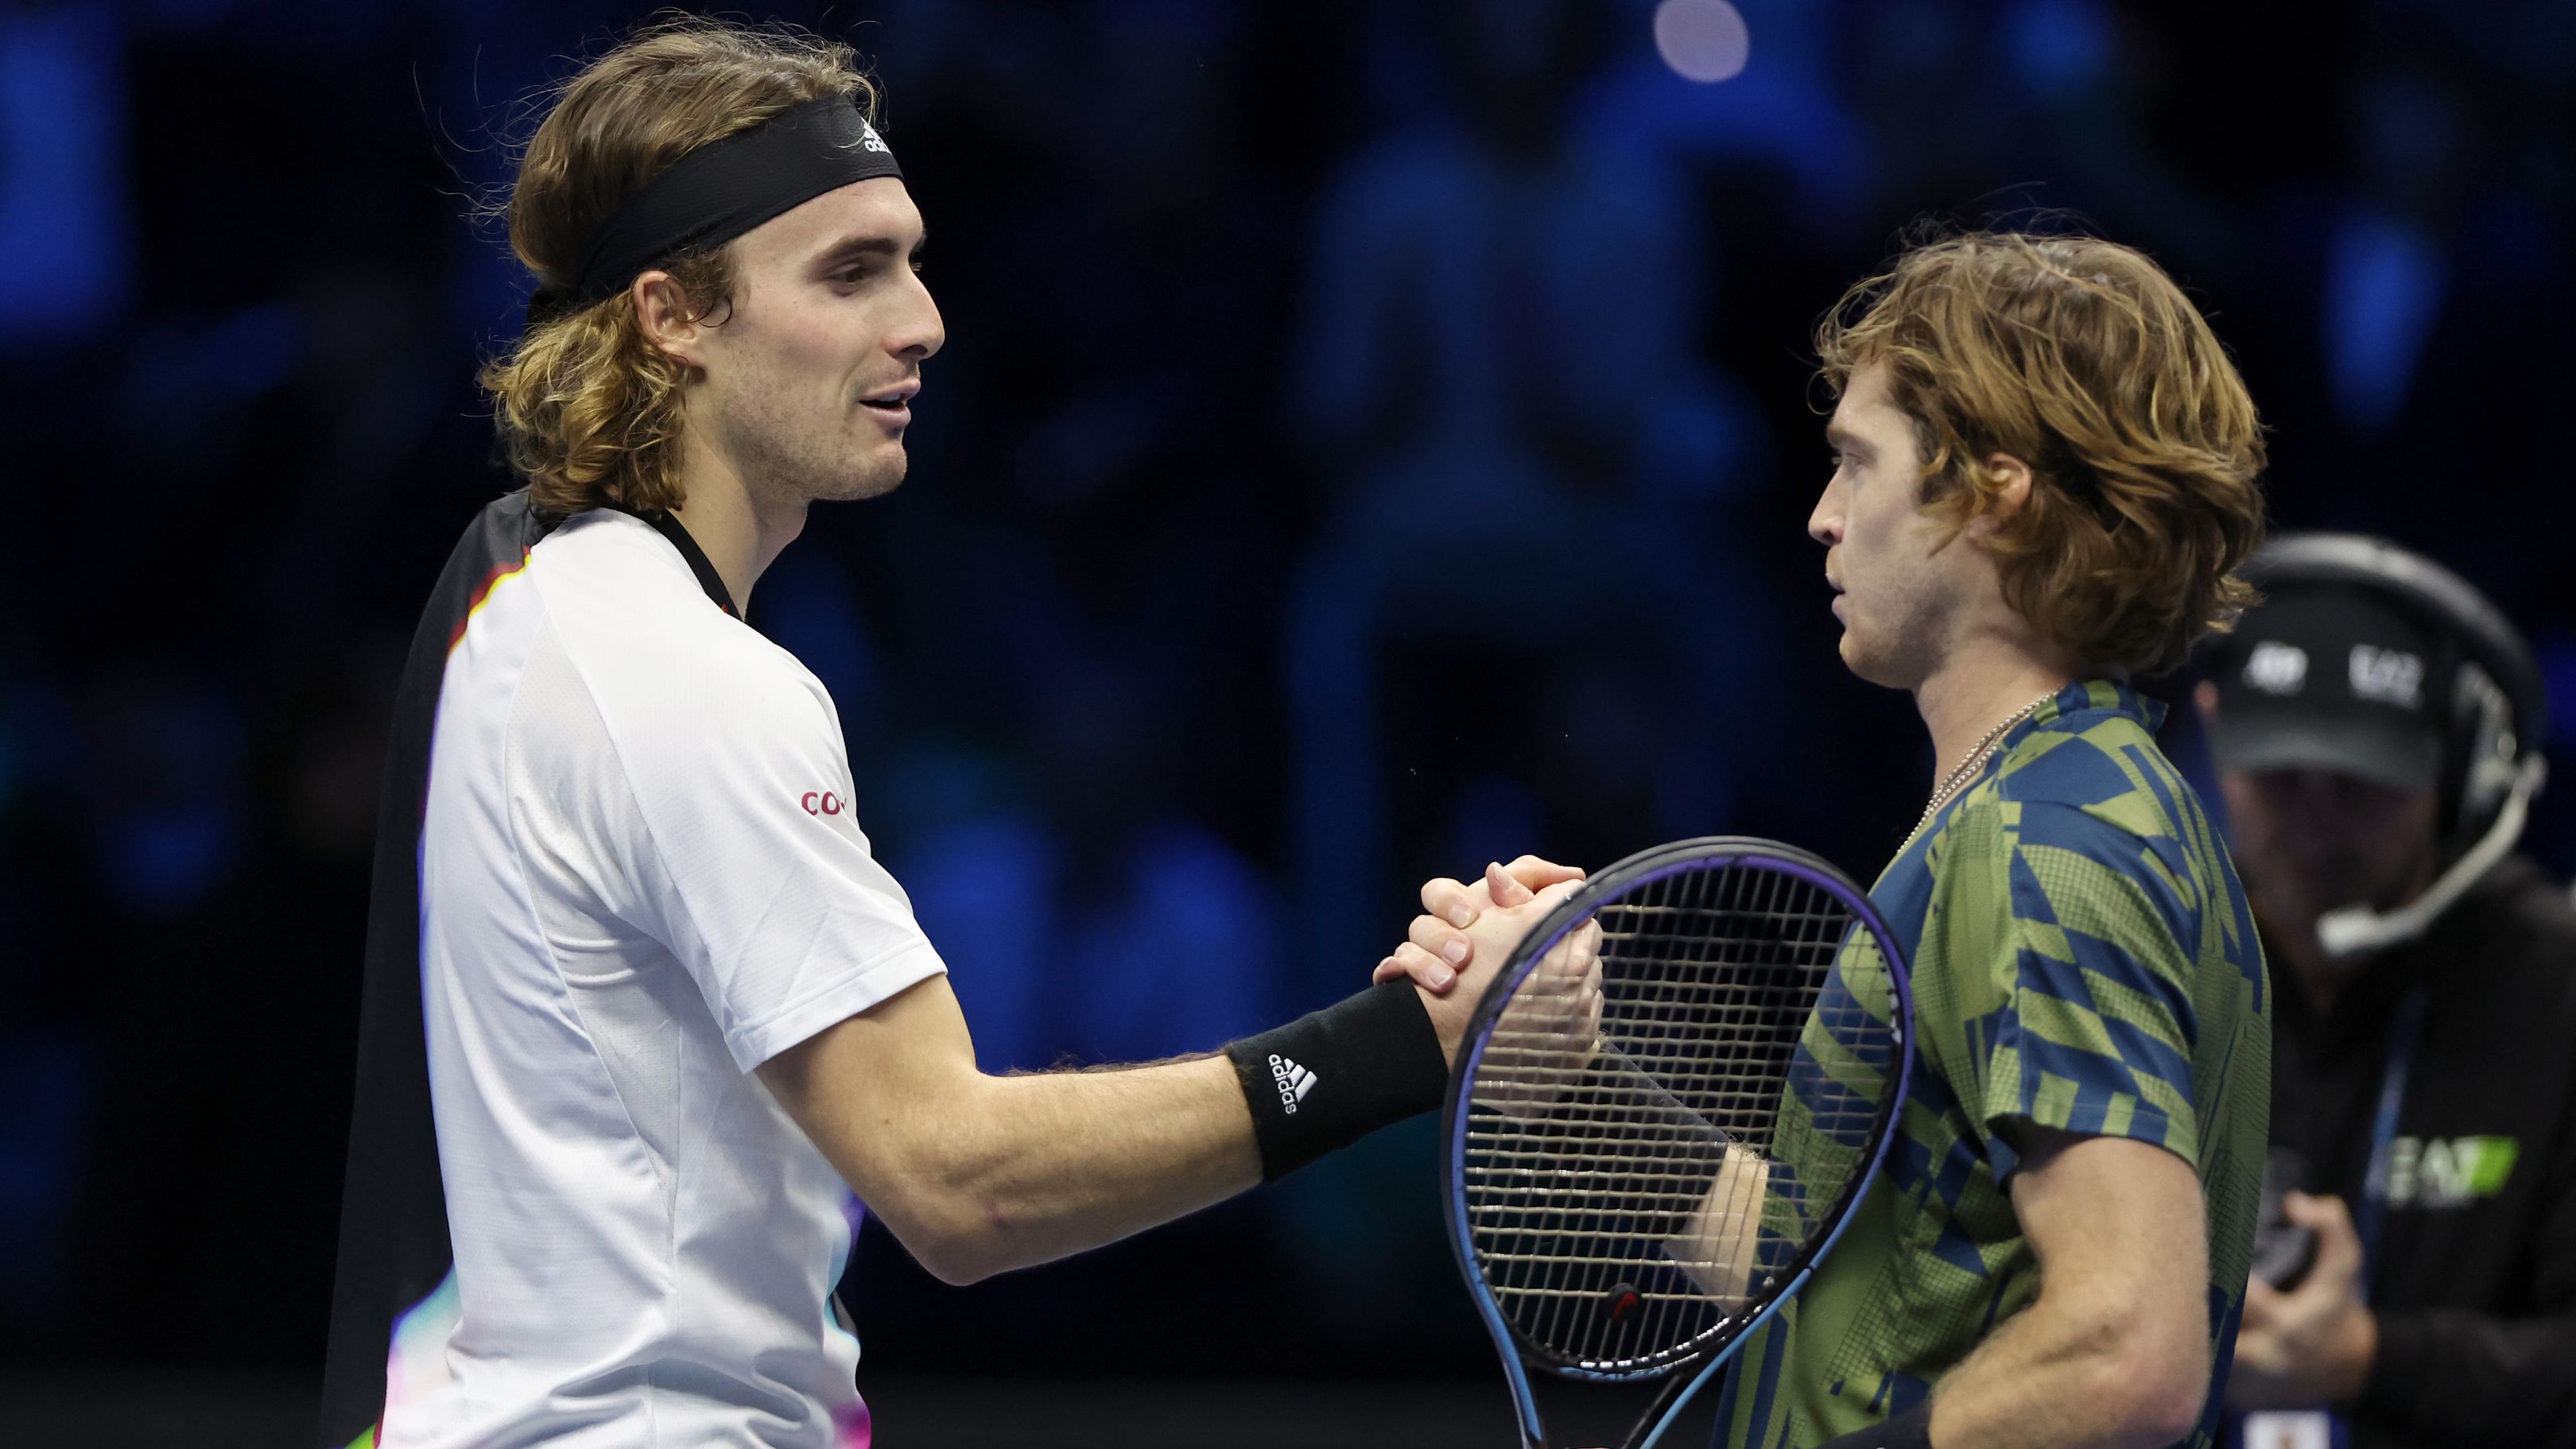 Stefanos Tsitsipas of Greece congratulates Andrey Rublev of Russia at the ATP Finals.